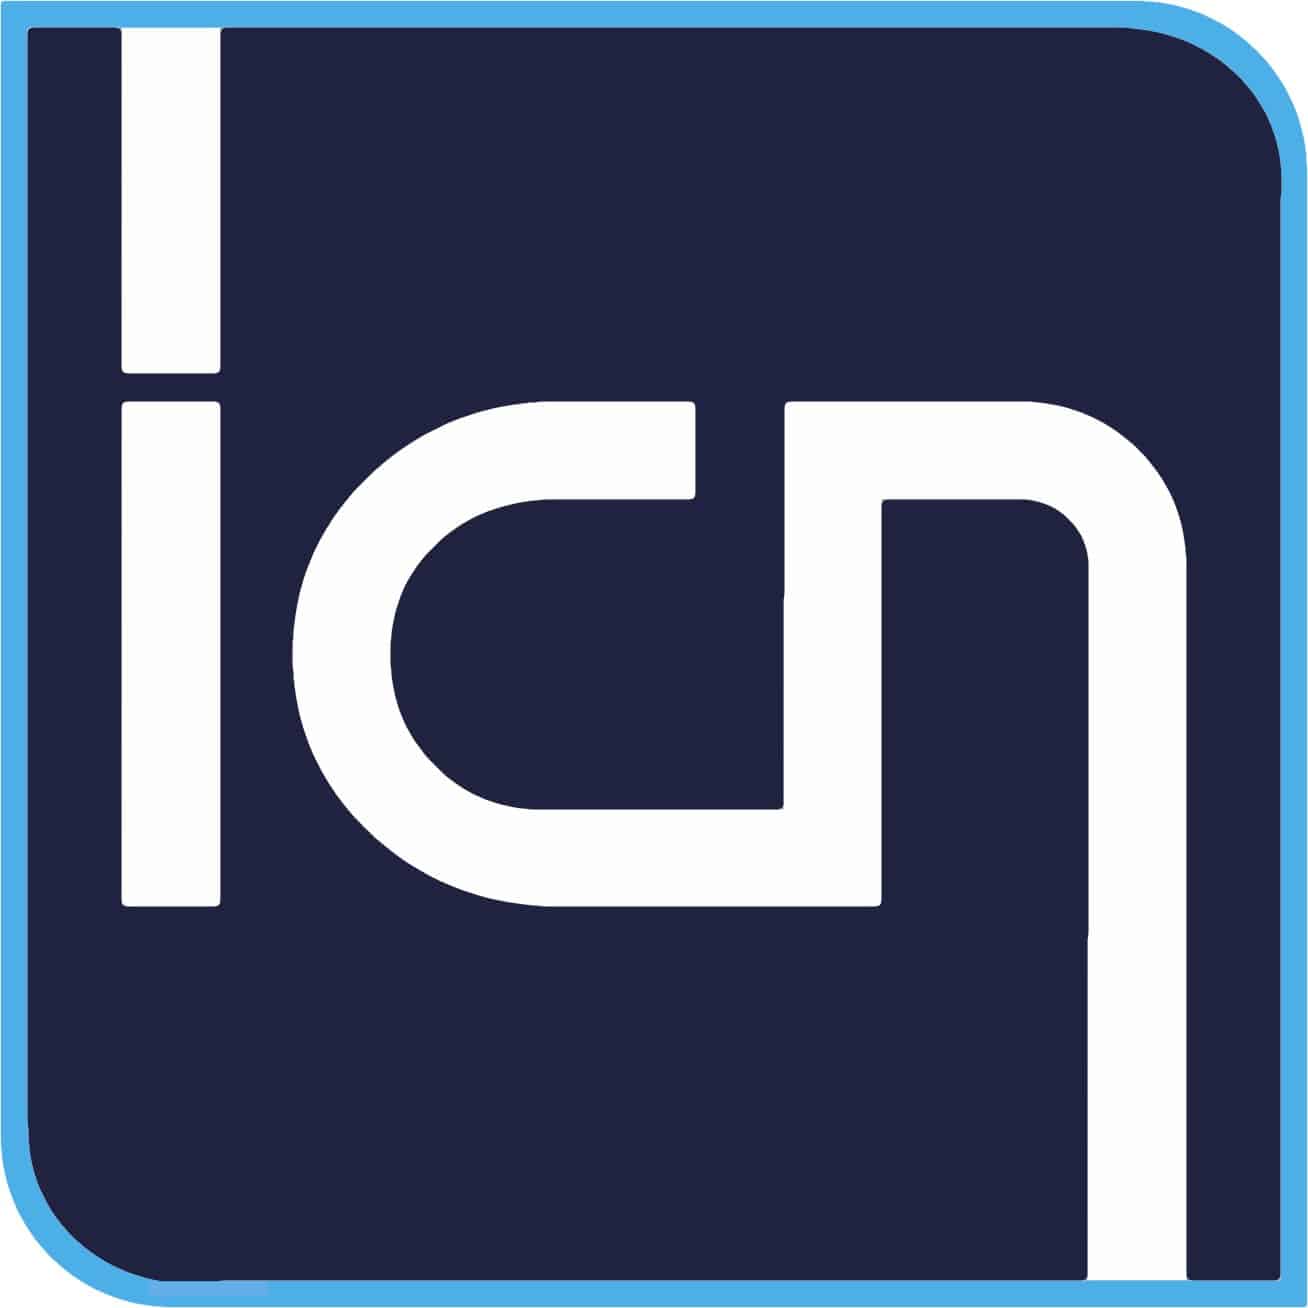 ICN Logo - Intensive Care Network Home Care Network